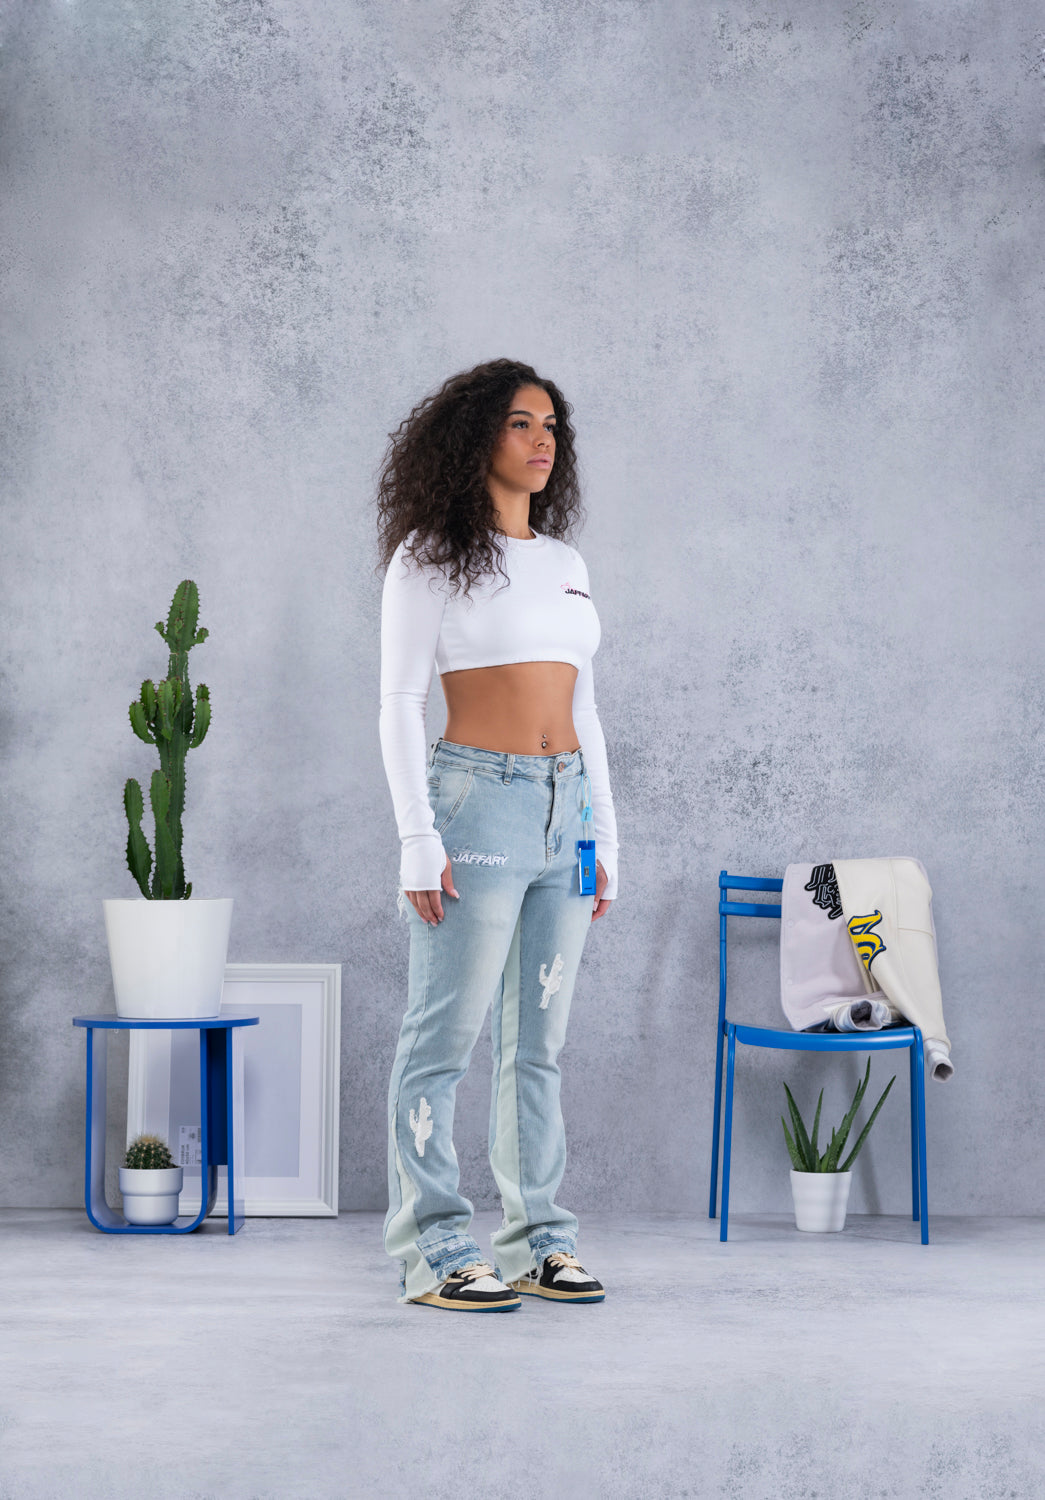 CACTUS PATCH FLARE JEANS